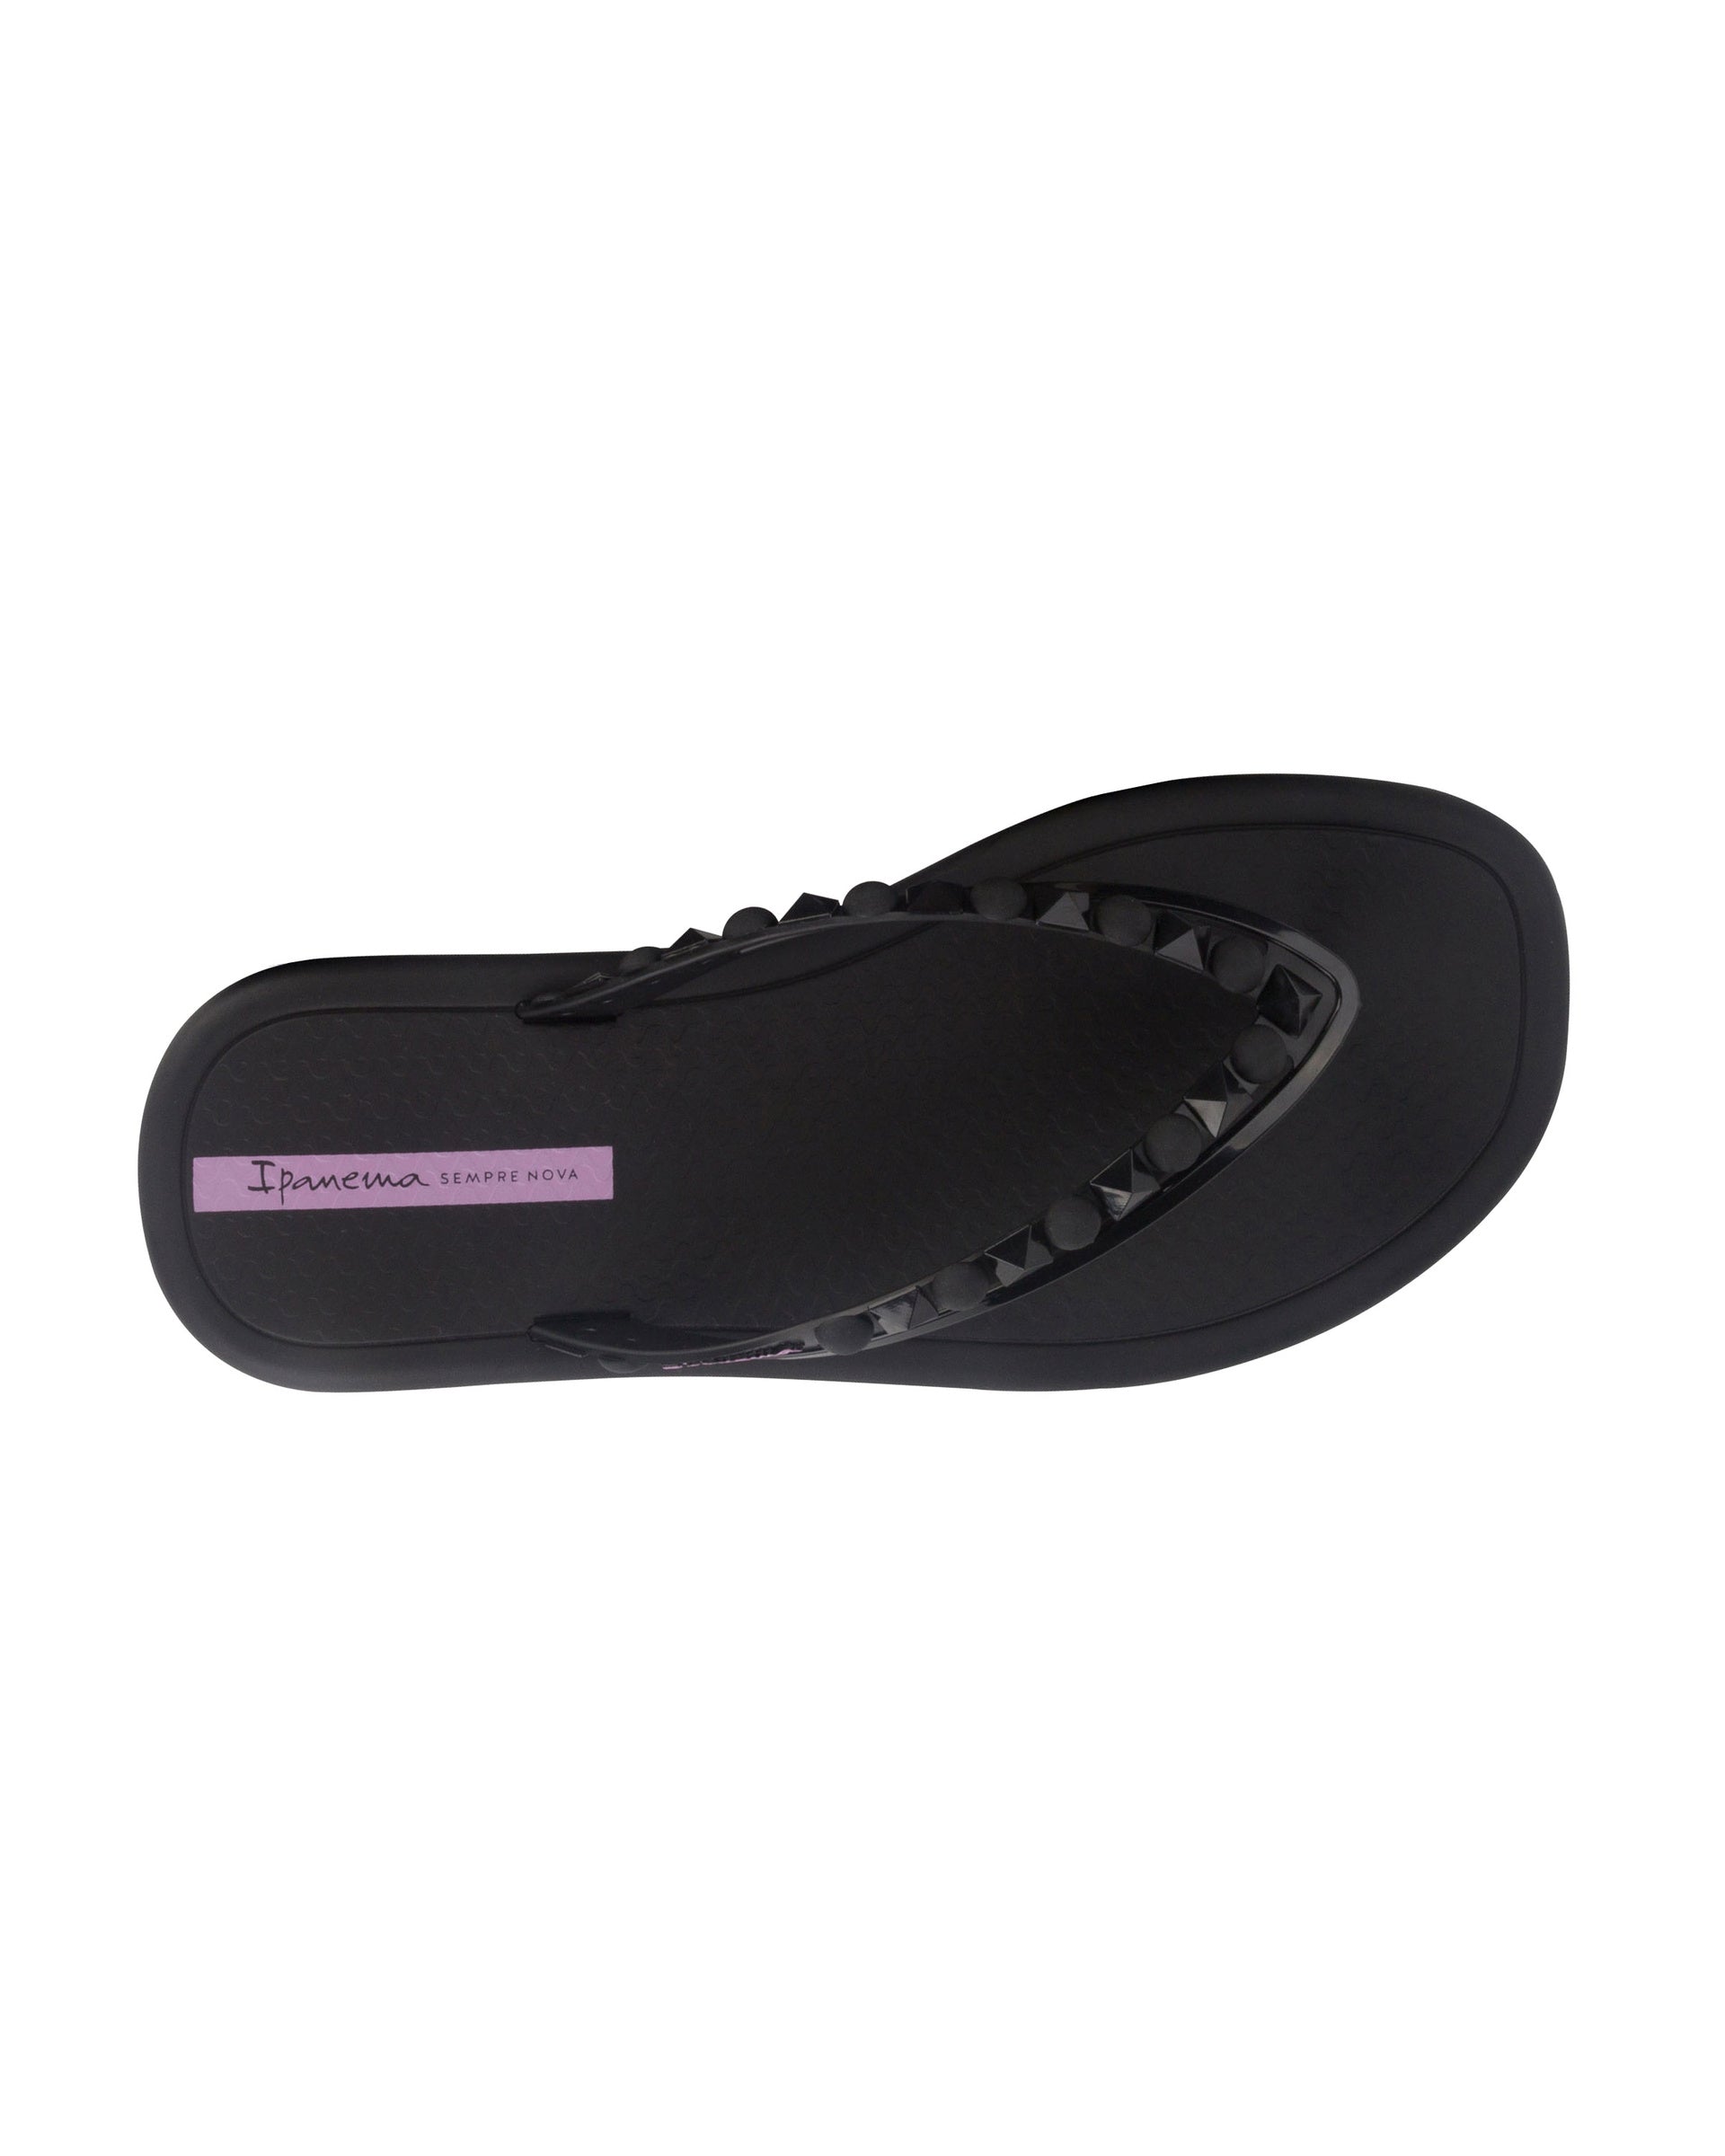 Top view of a black Ipanema Meu Sol women's flip flop with stud details on strap.